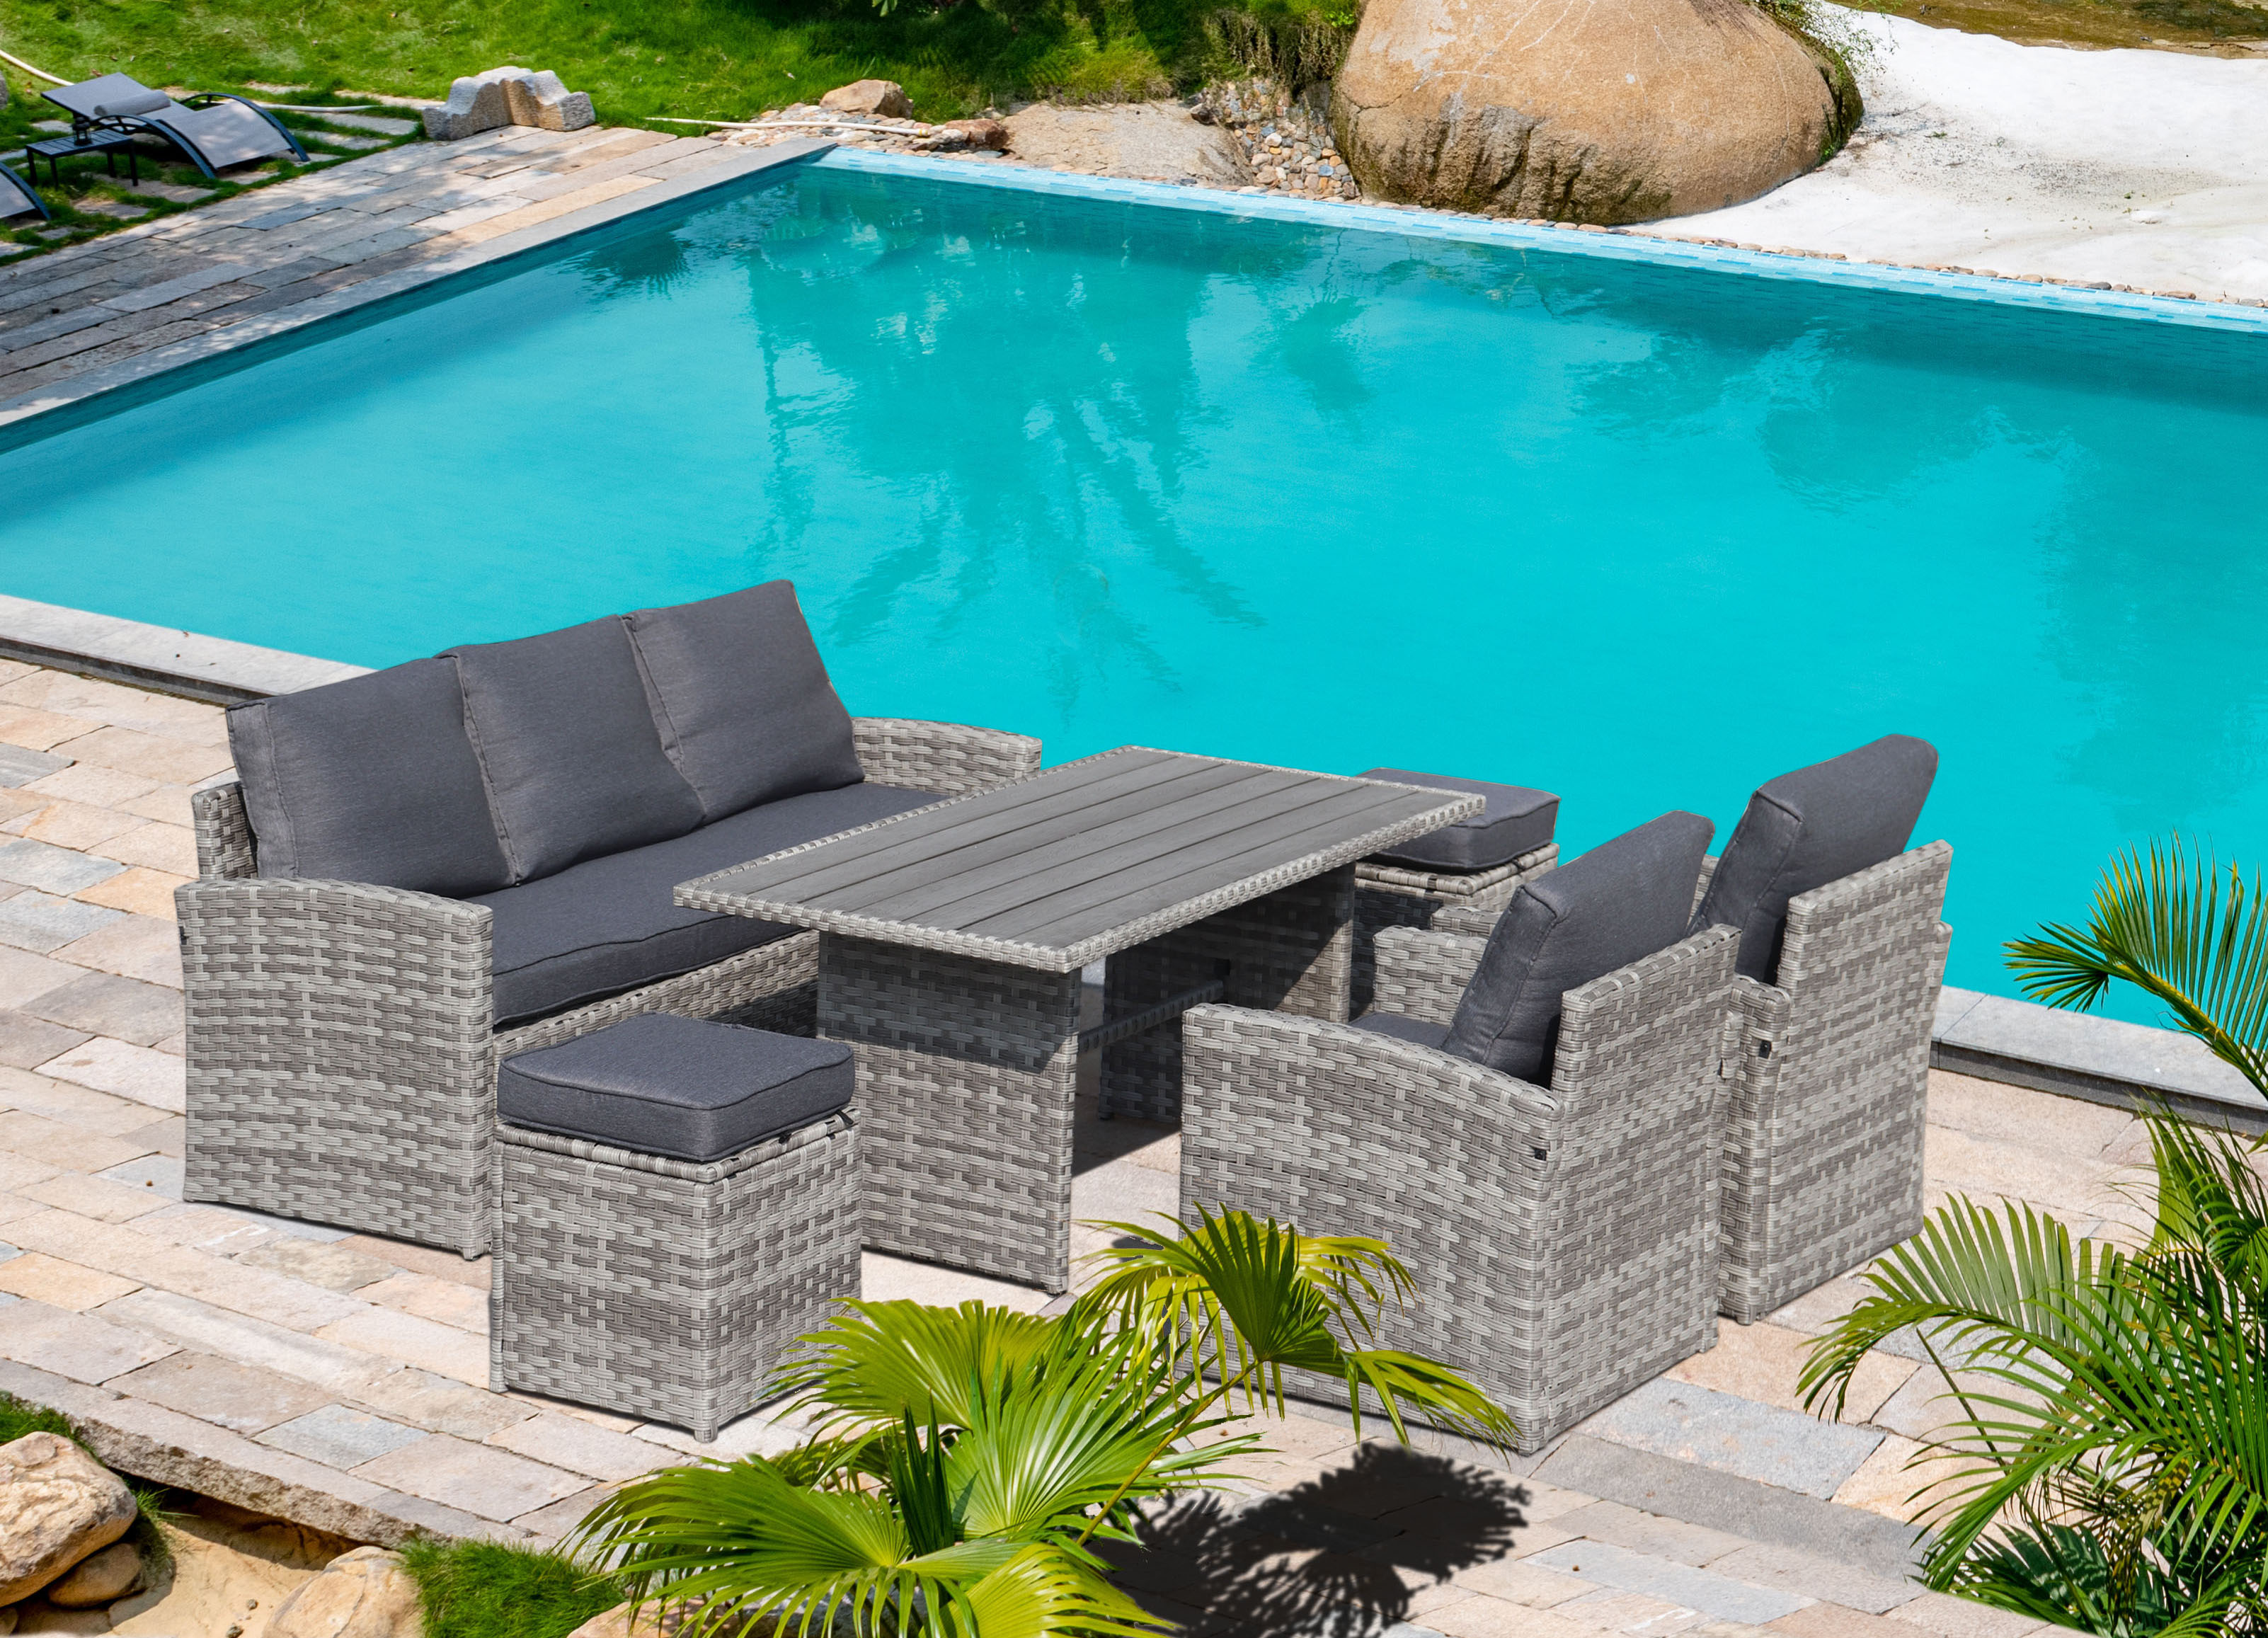 Patio Wicker Sofa Sets, 6 Piece Sectional Furniture Set with Dining Table, All Weather Rattan Furniture Set, Outdoor Conversation Chairs Set with Cushions, for Poolside, Backyard, Deck, D8177 - image 1 of 12